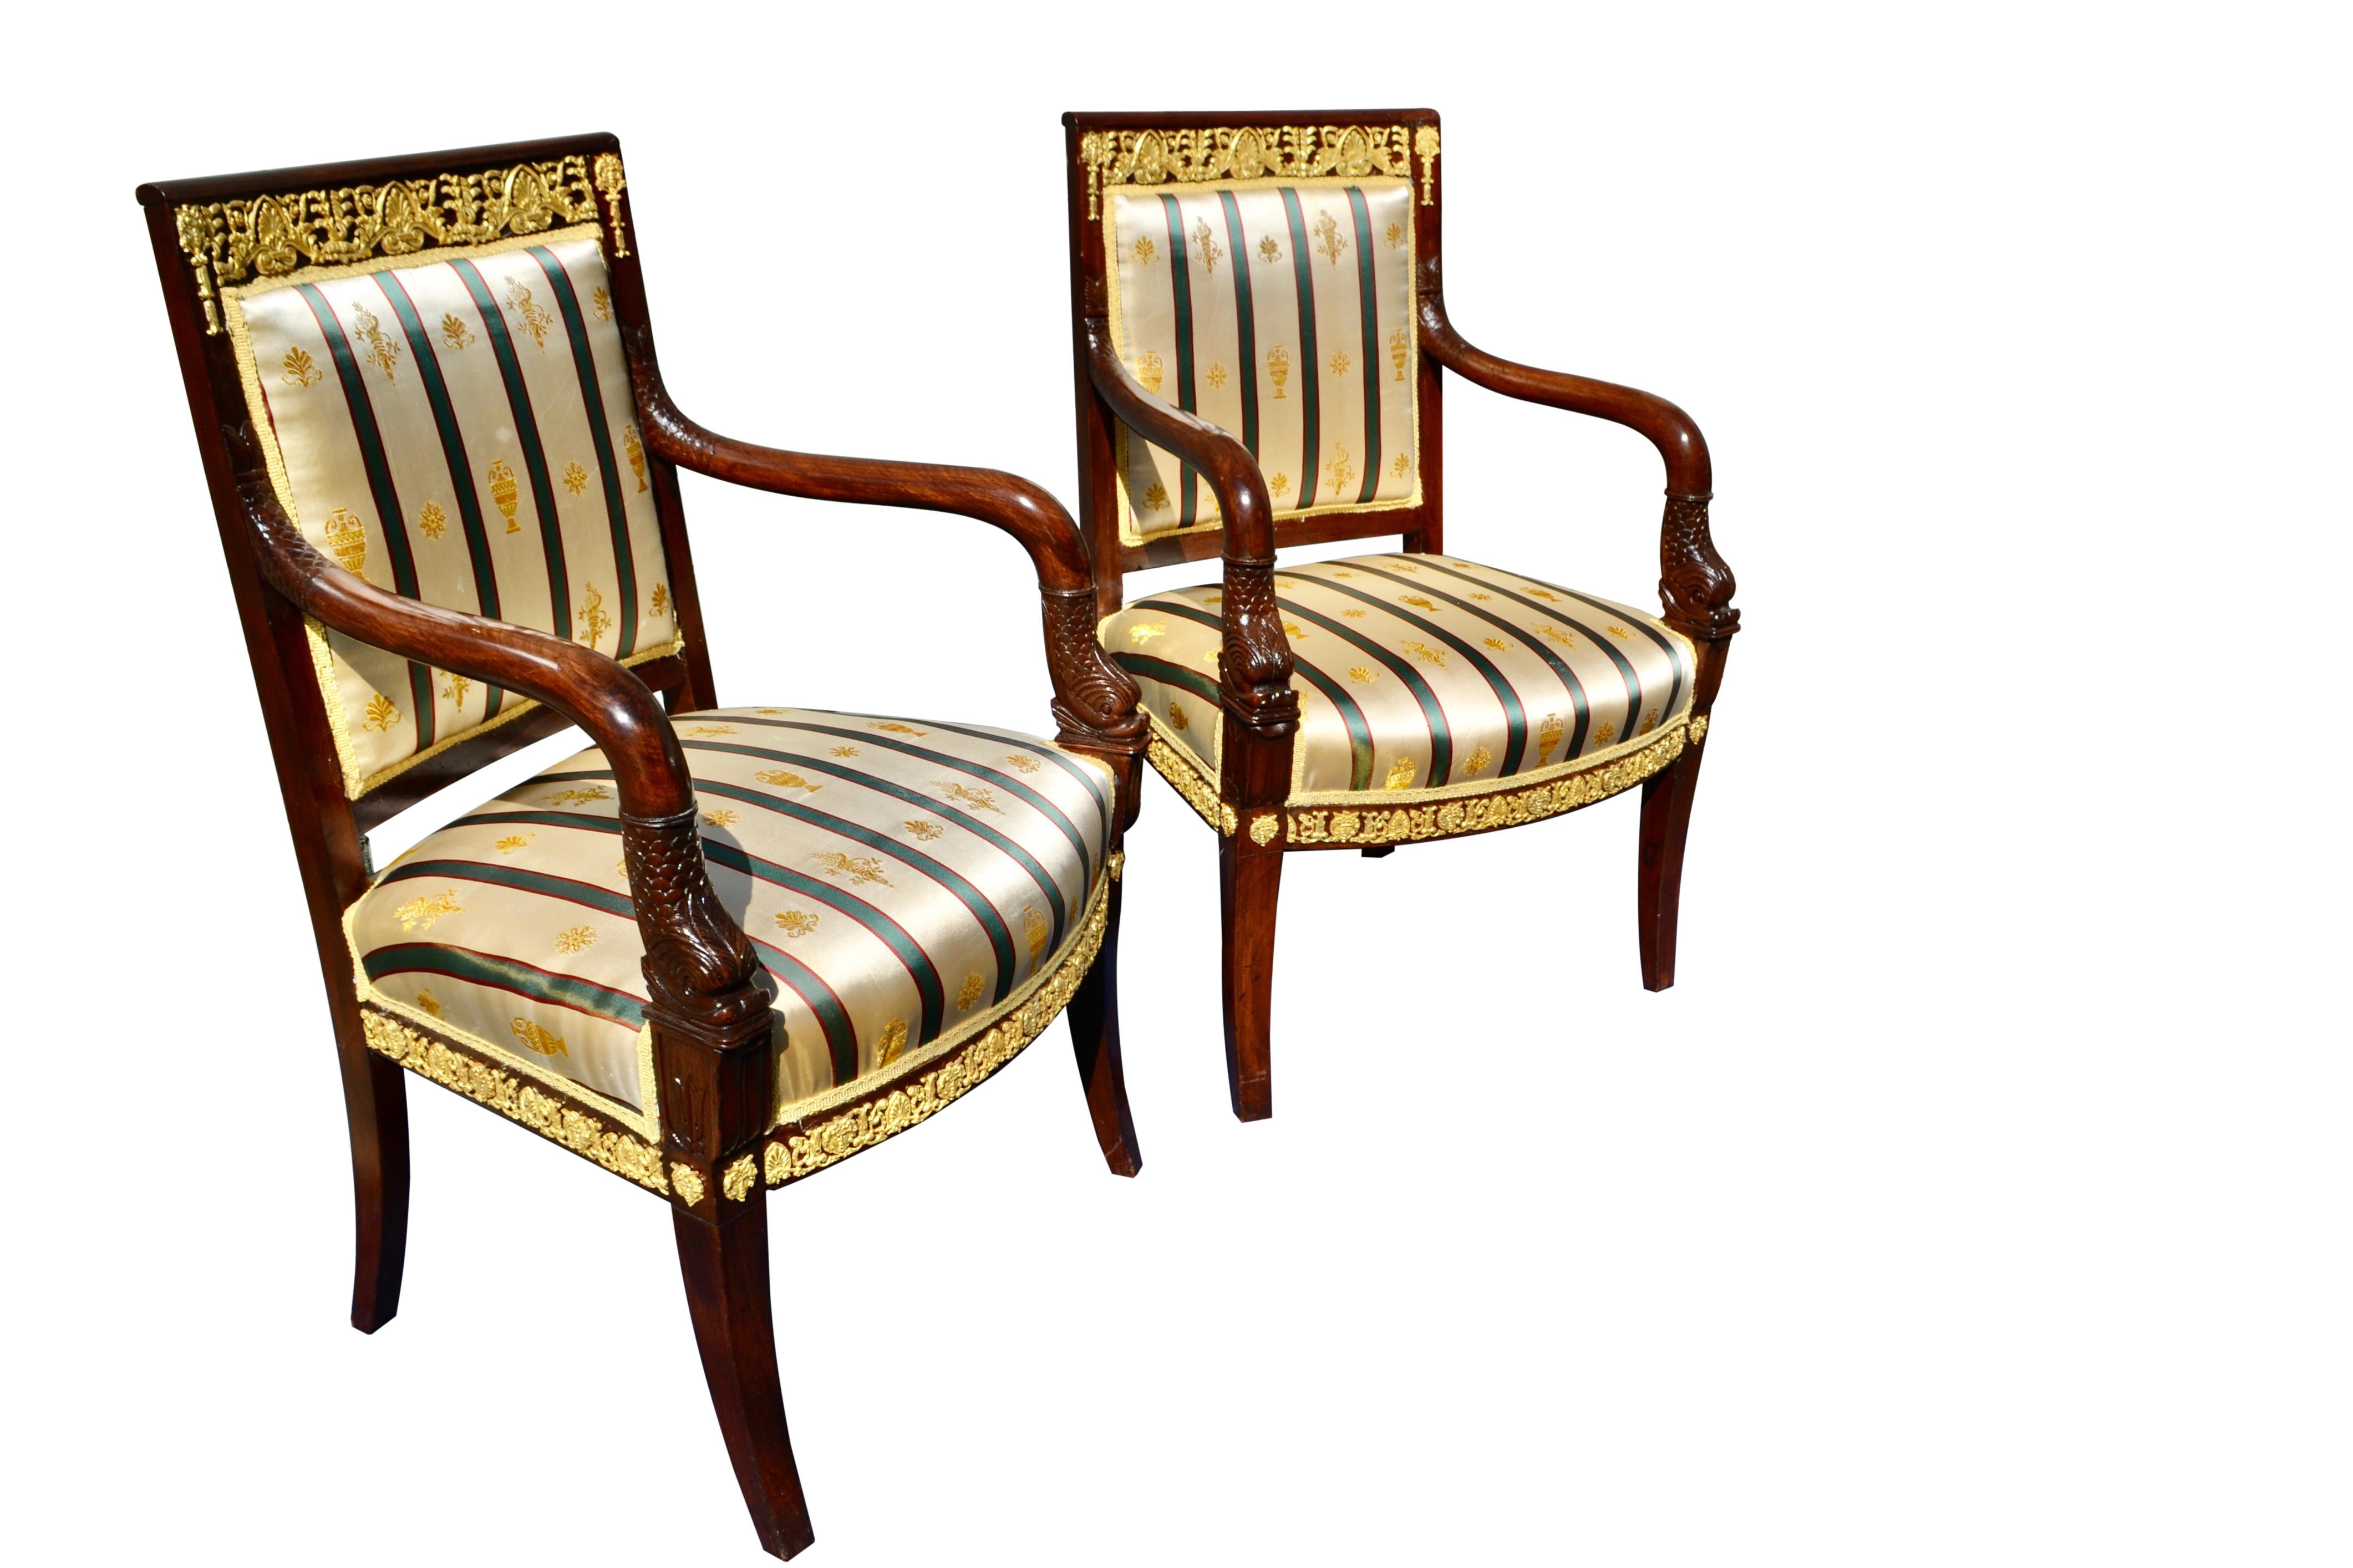 Pair of French Empire Mahogany and Gilt Bronze Mounted Armchairs In Good Condition For Sale In Vancouver, British Columbia